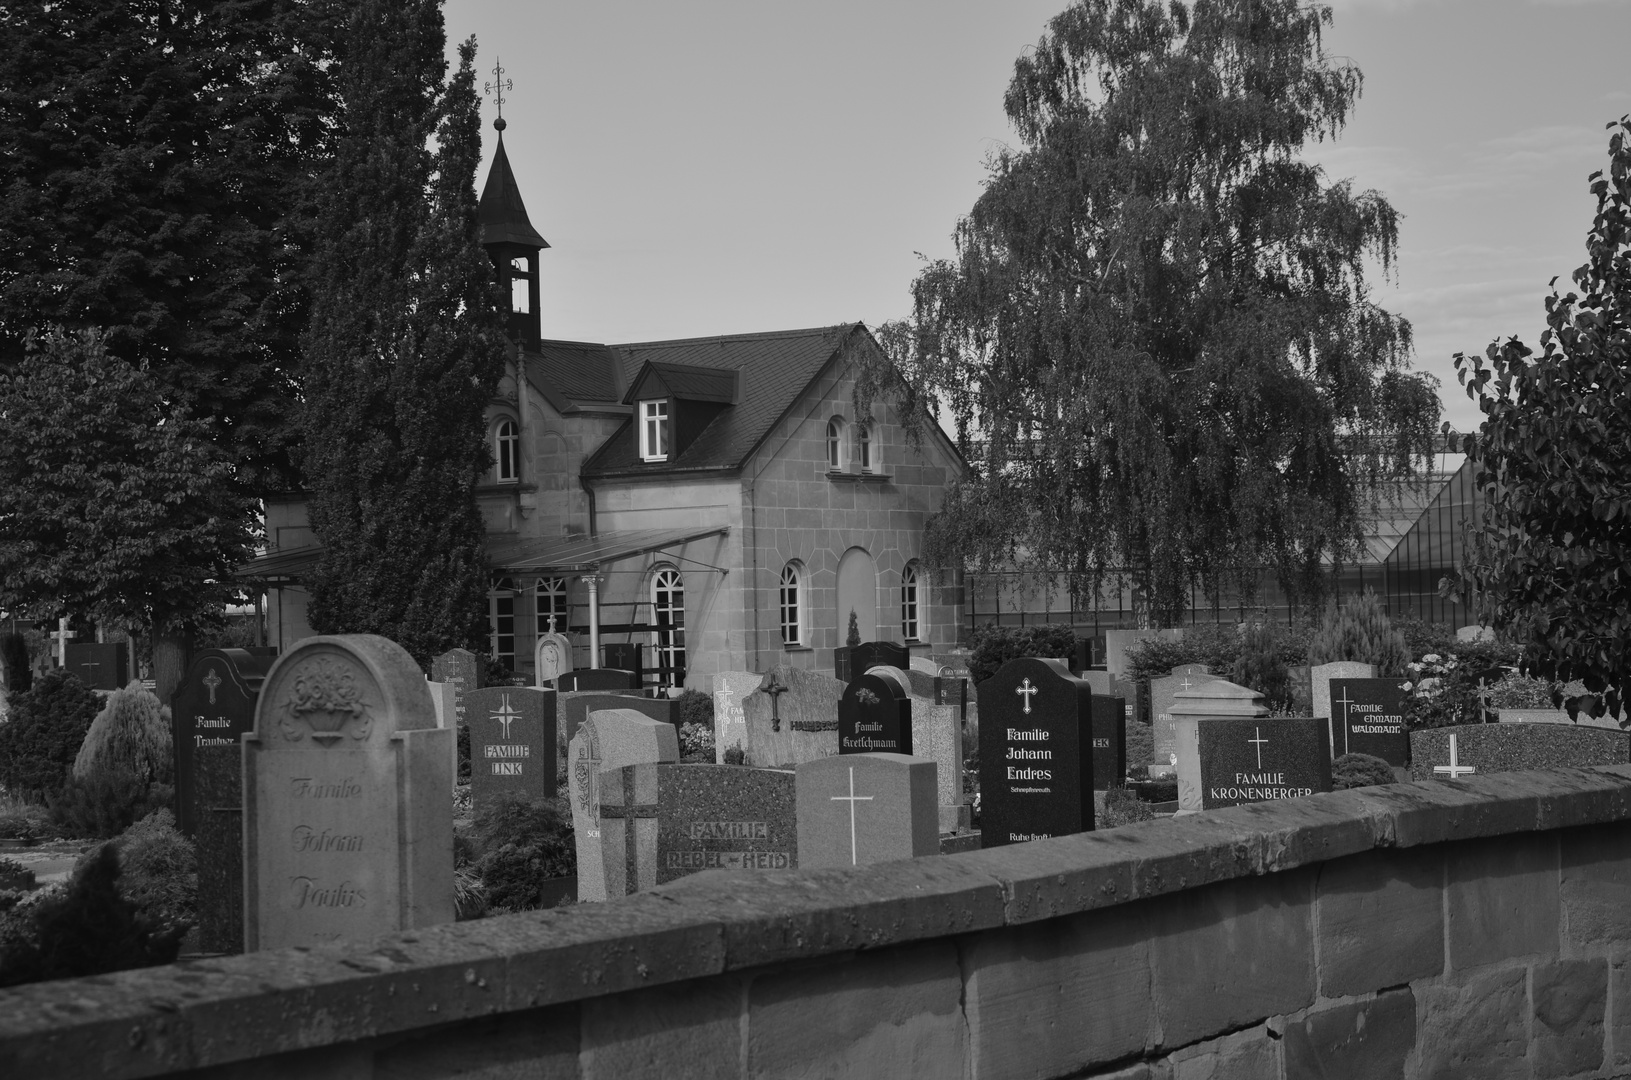 Cemetary of Poppenreuth